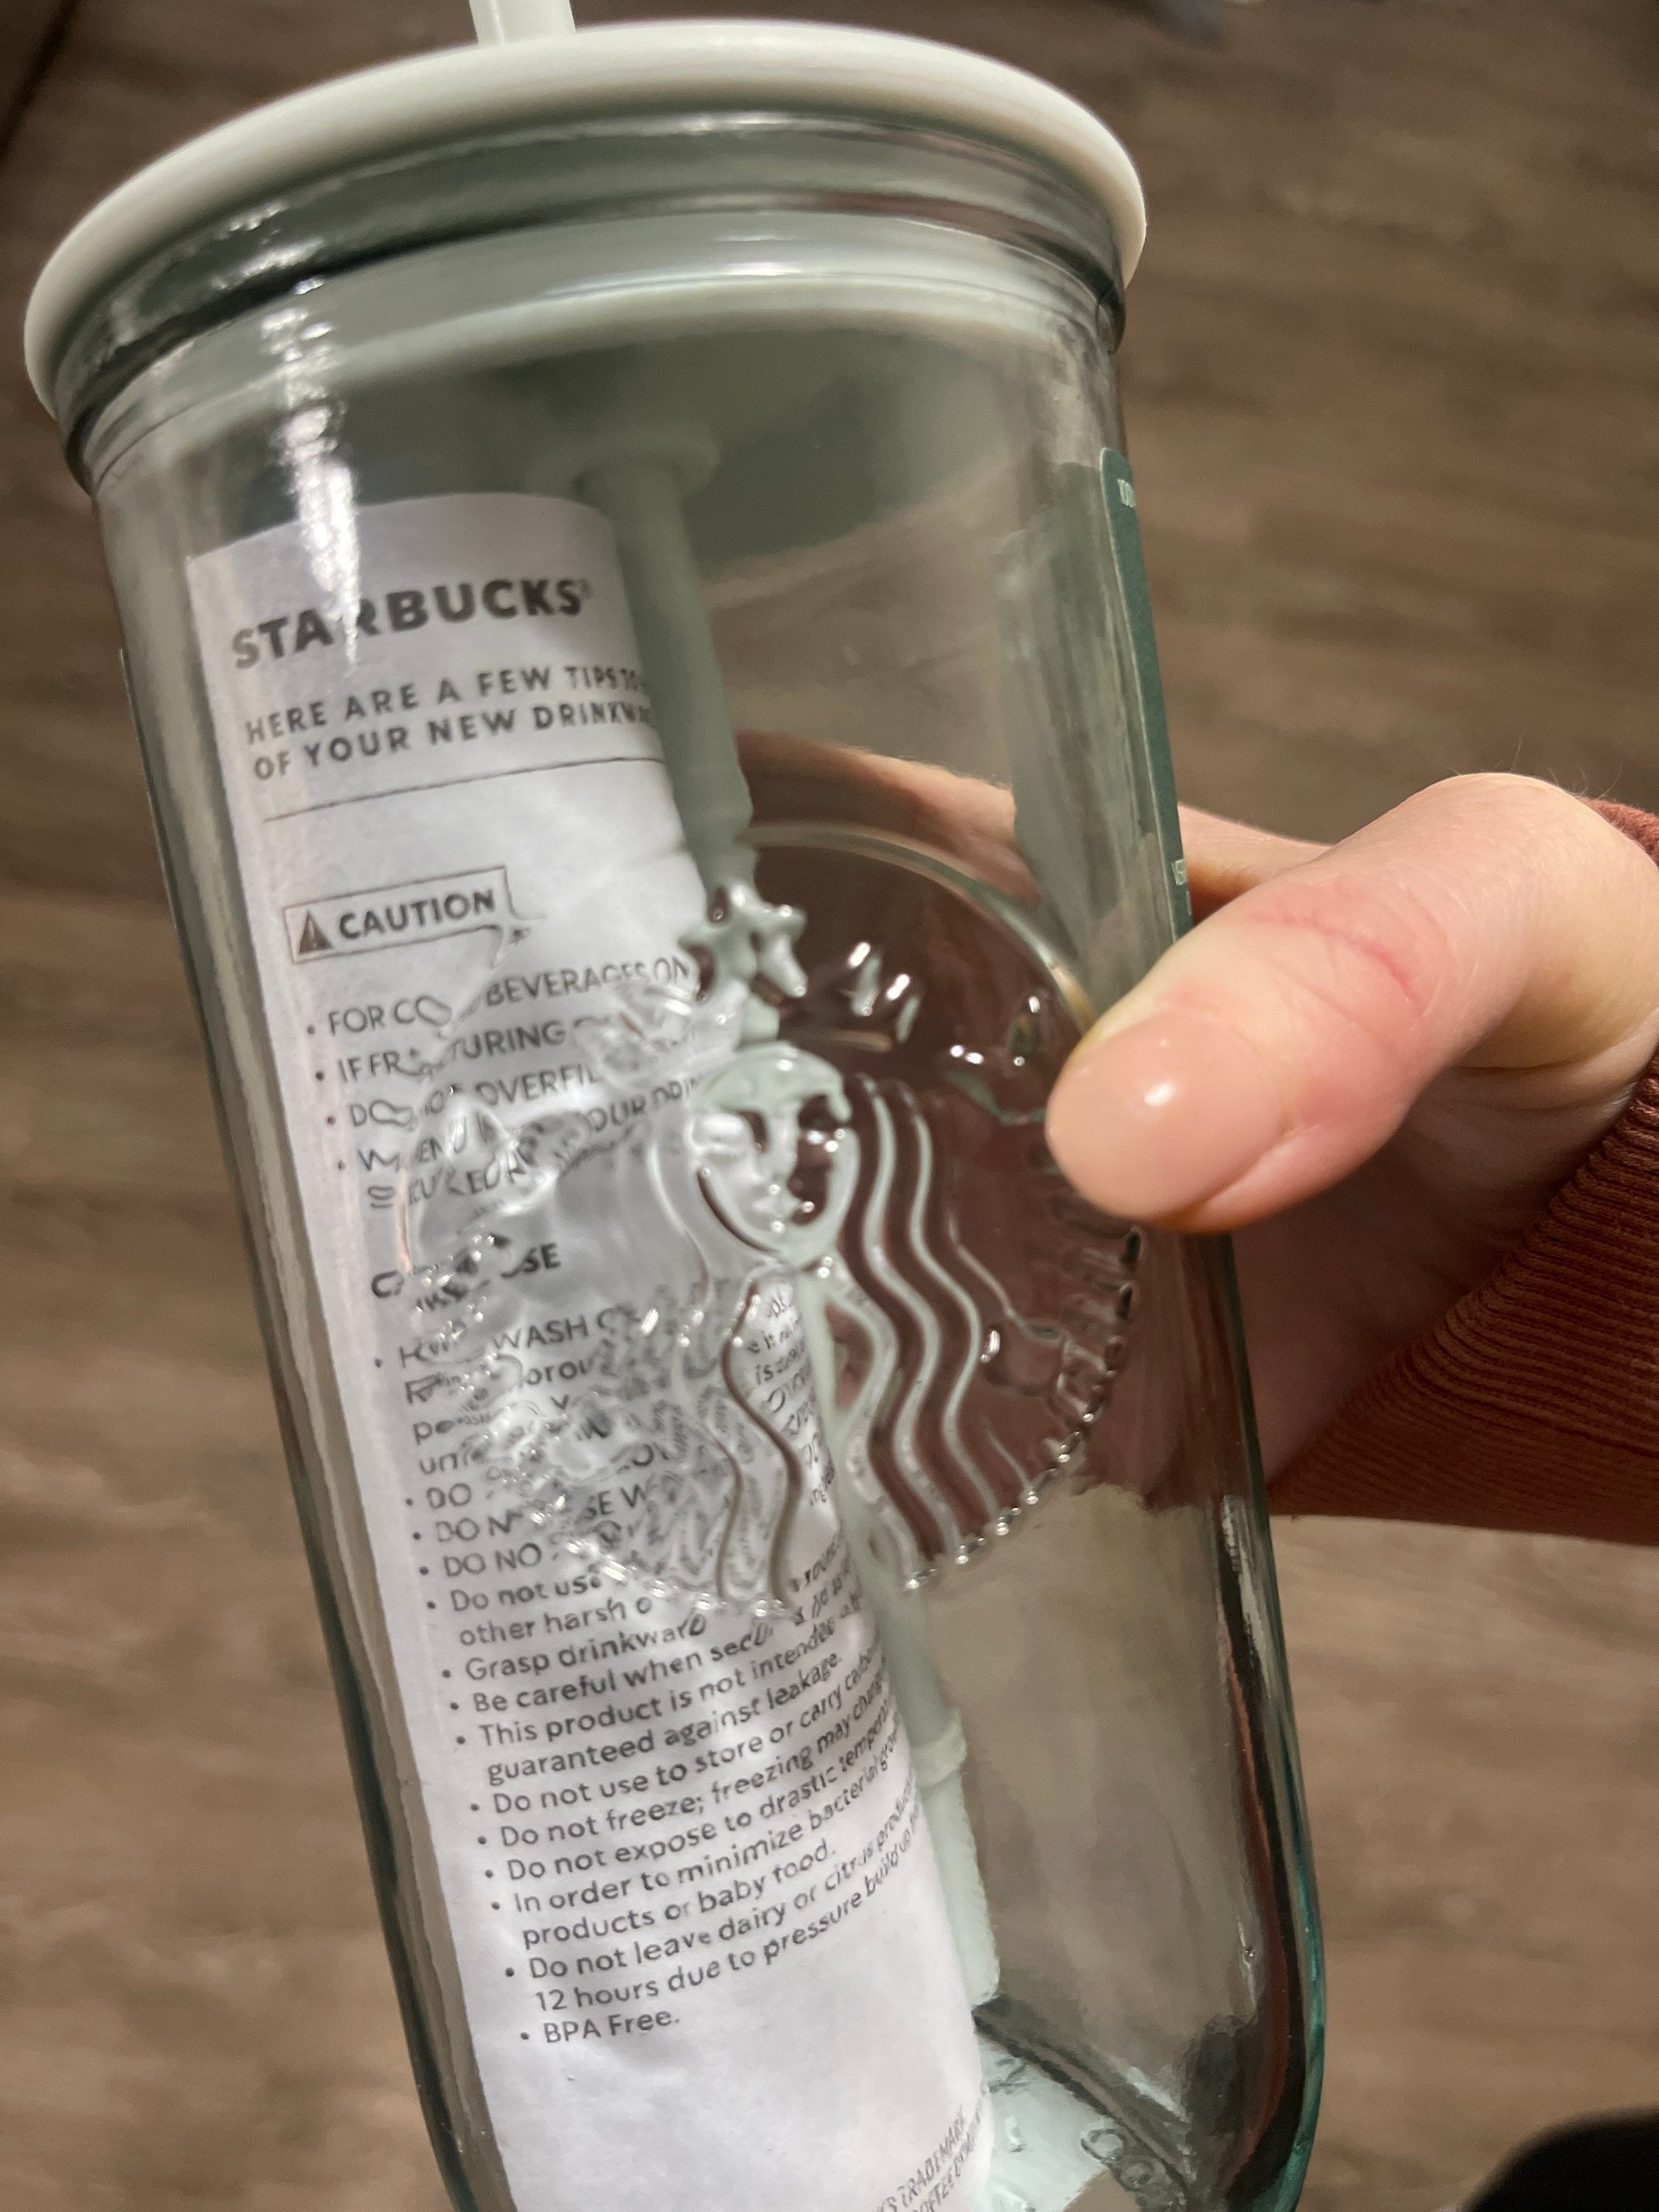 2 -1 - 20160620_192432 starbucks reserve roastery recycled glass cold cup 